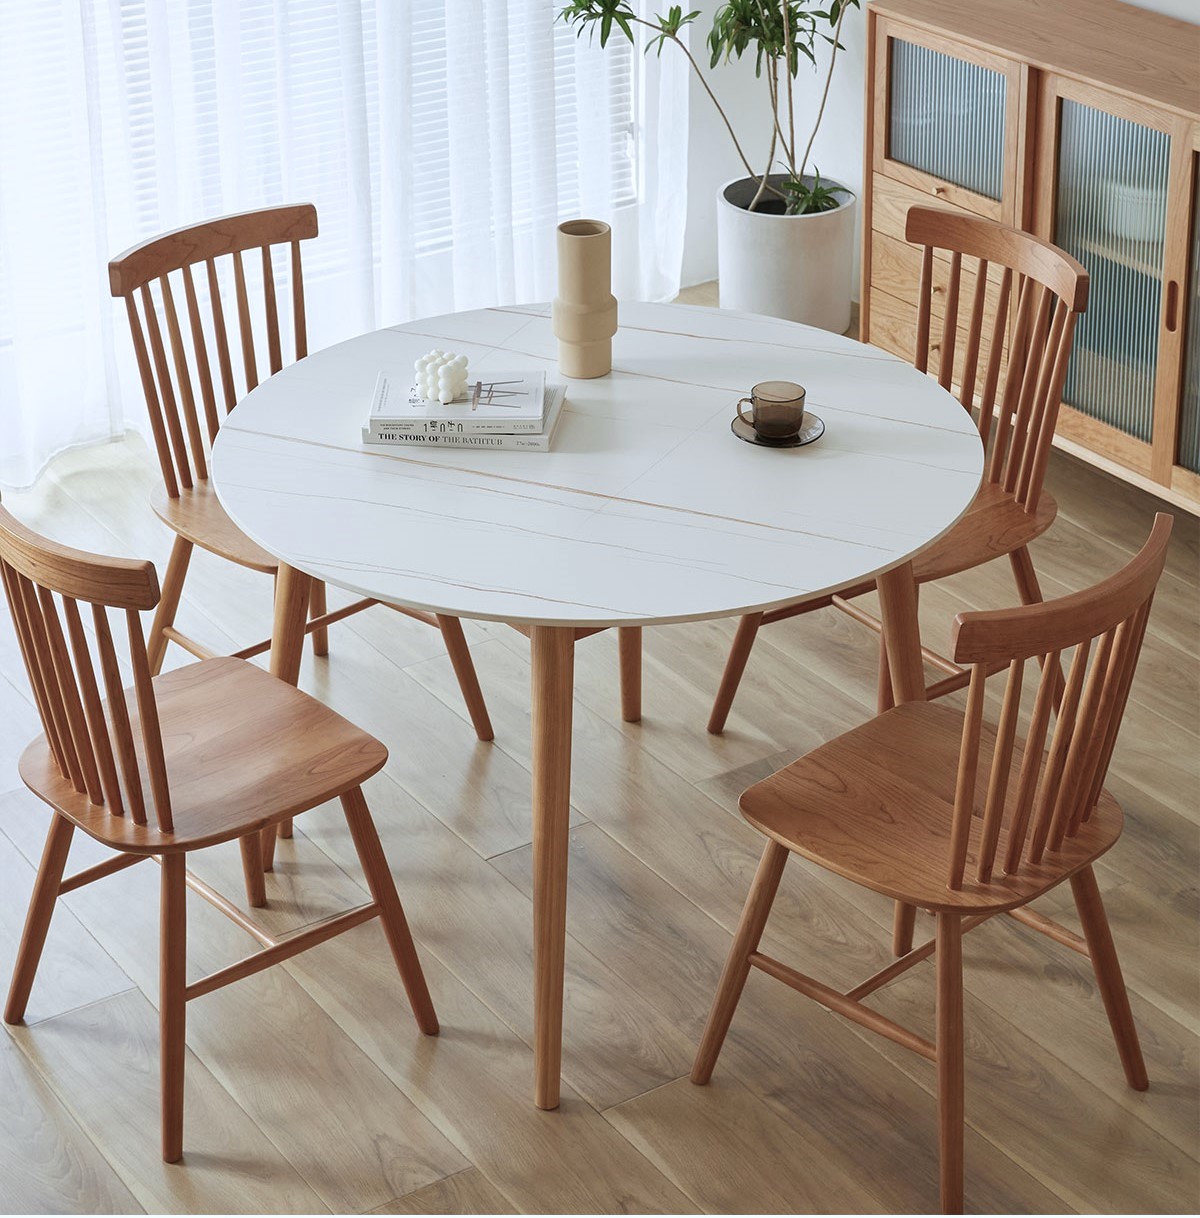 Round table + 4 chairs(YR-2L#)